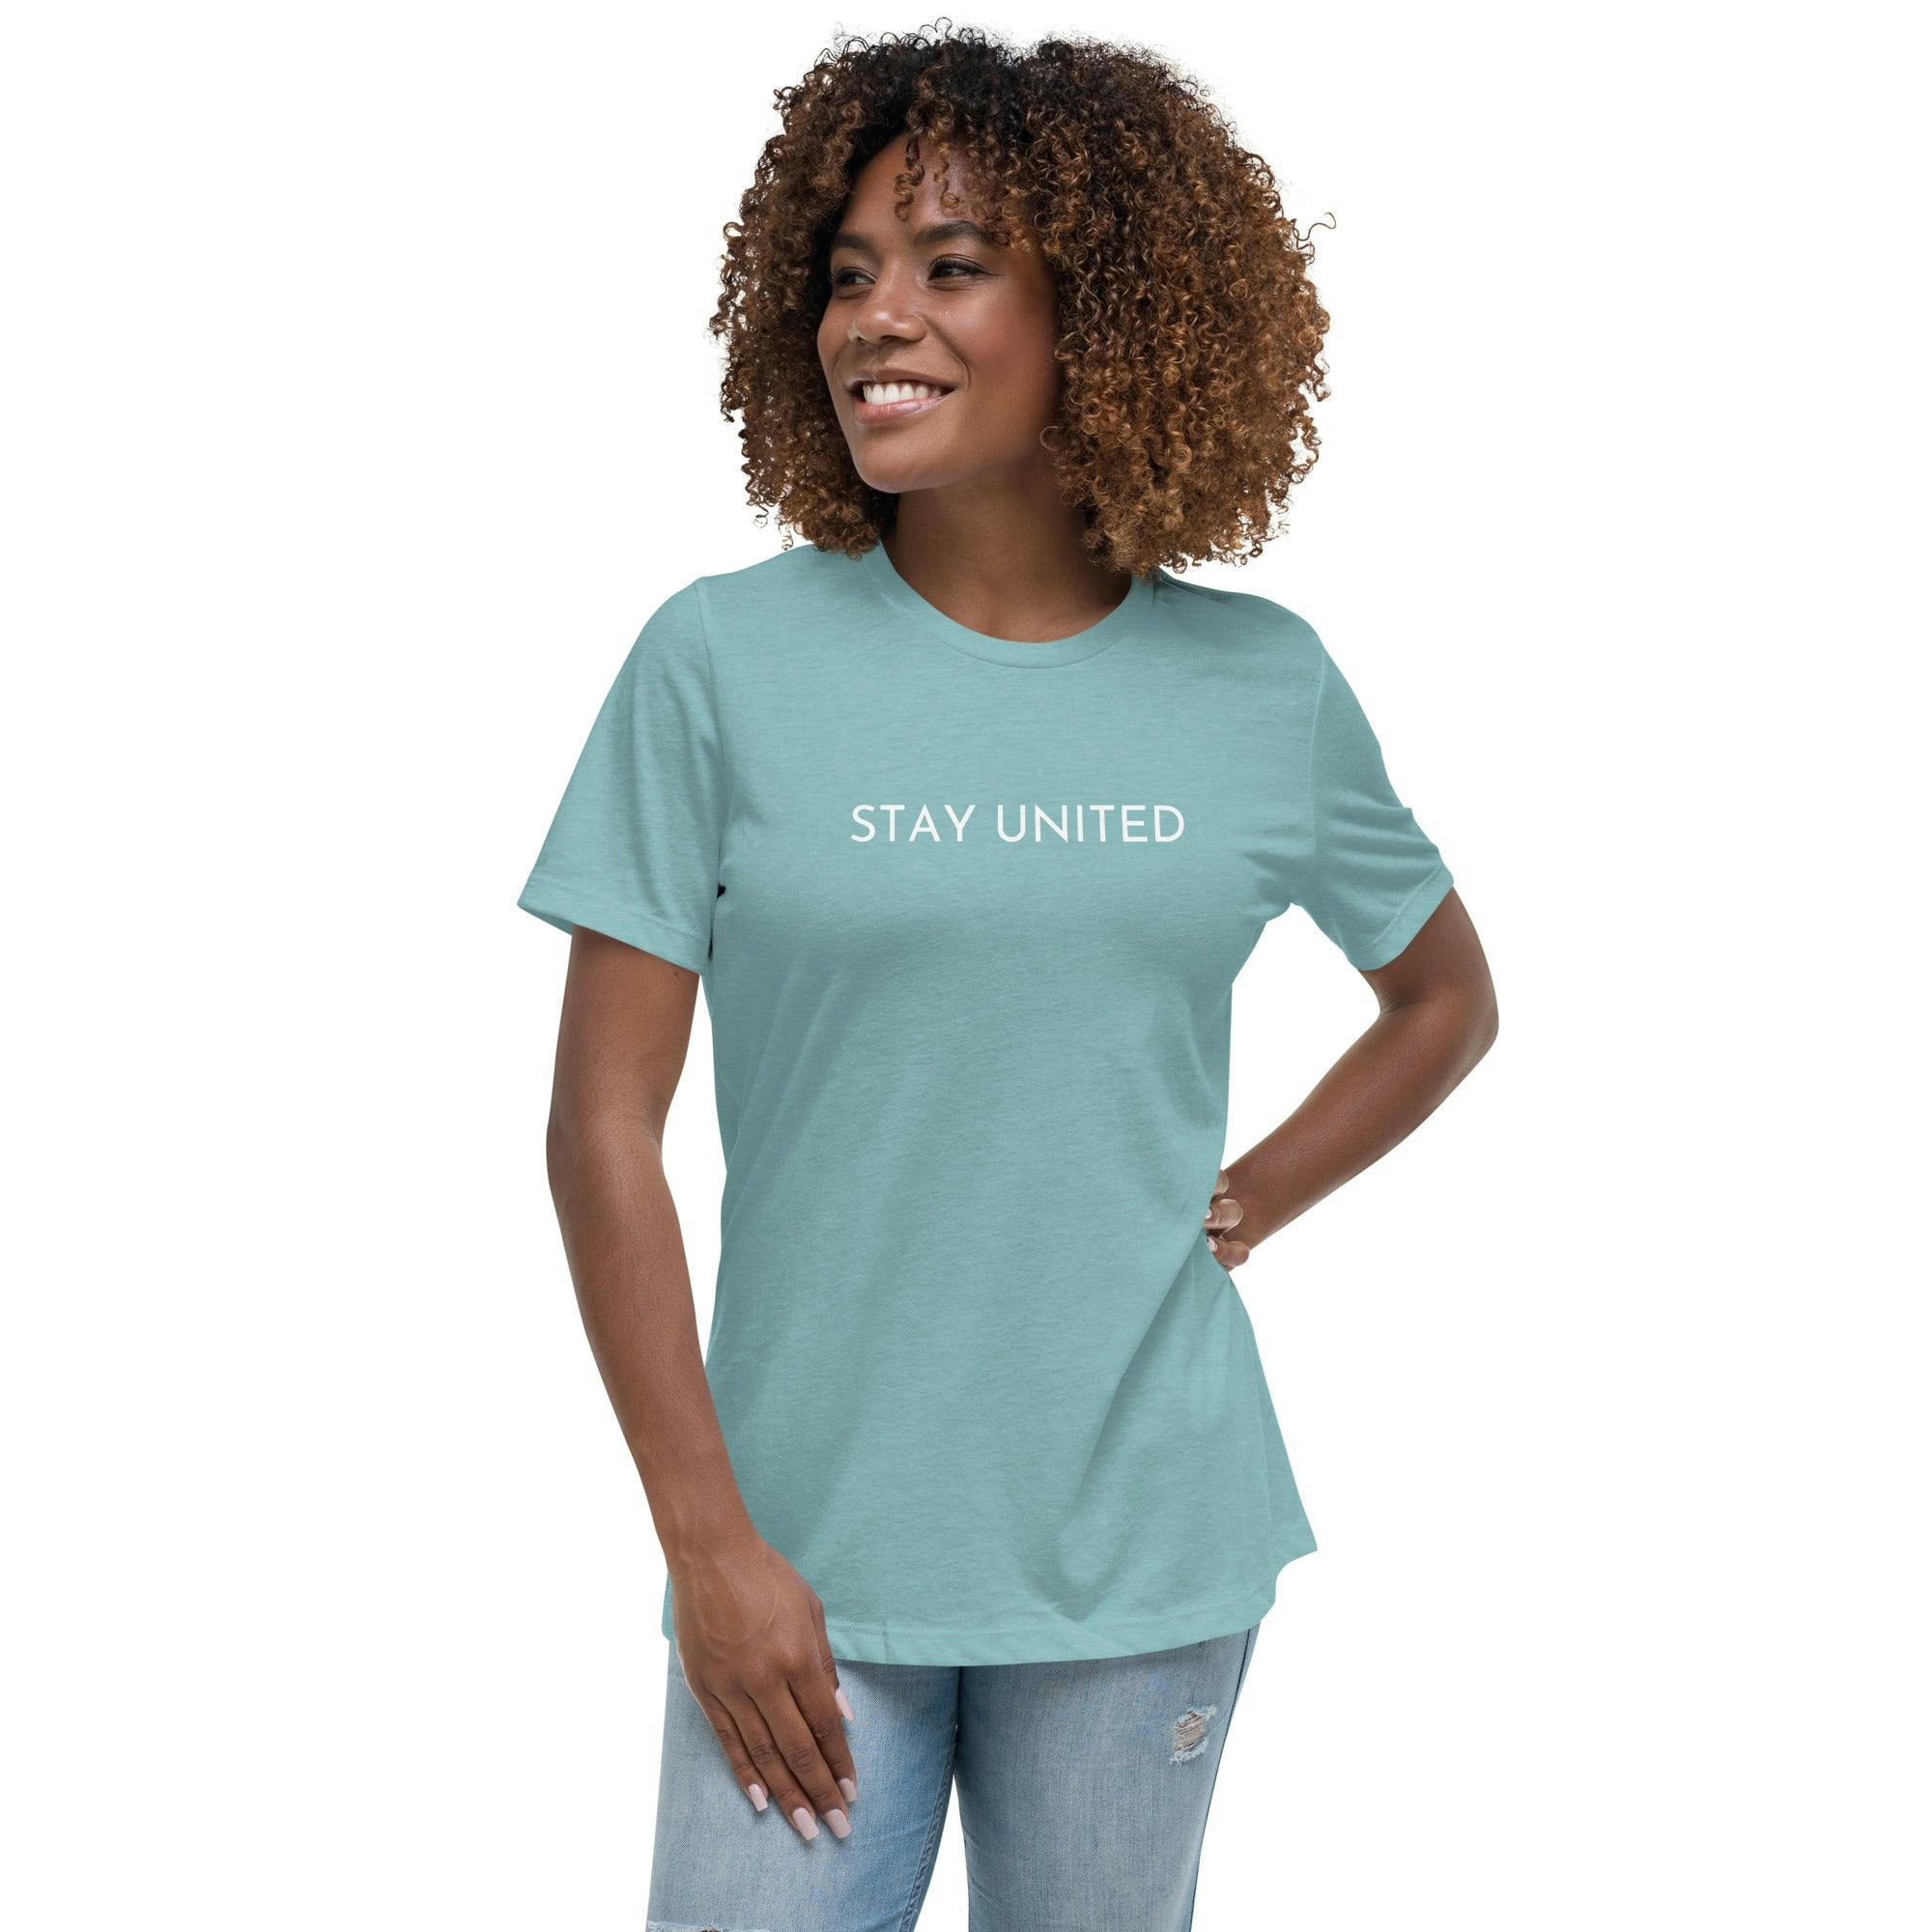 Women's Relaxed T-Shirt - womens-relaxed-t-shirt-heather-blue-lagoon-front-653f0ed067c88